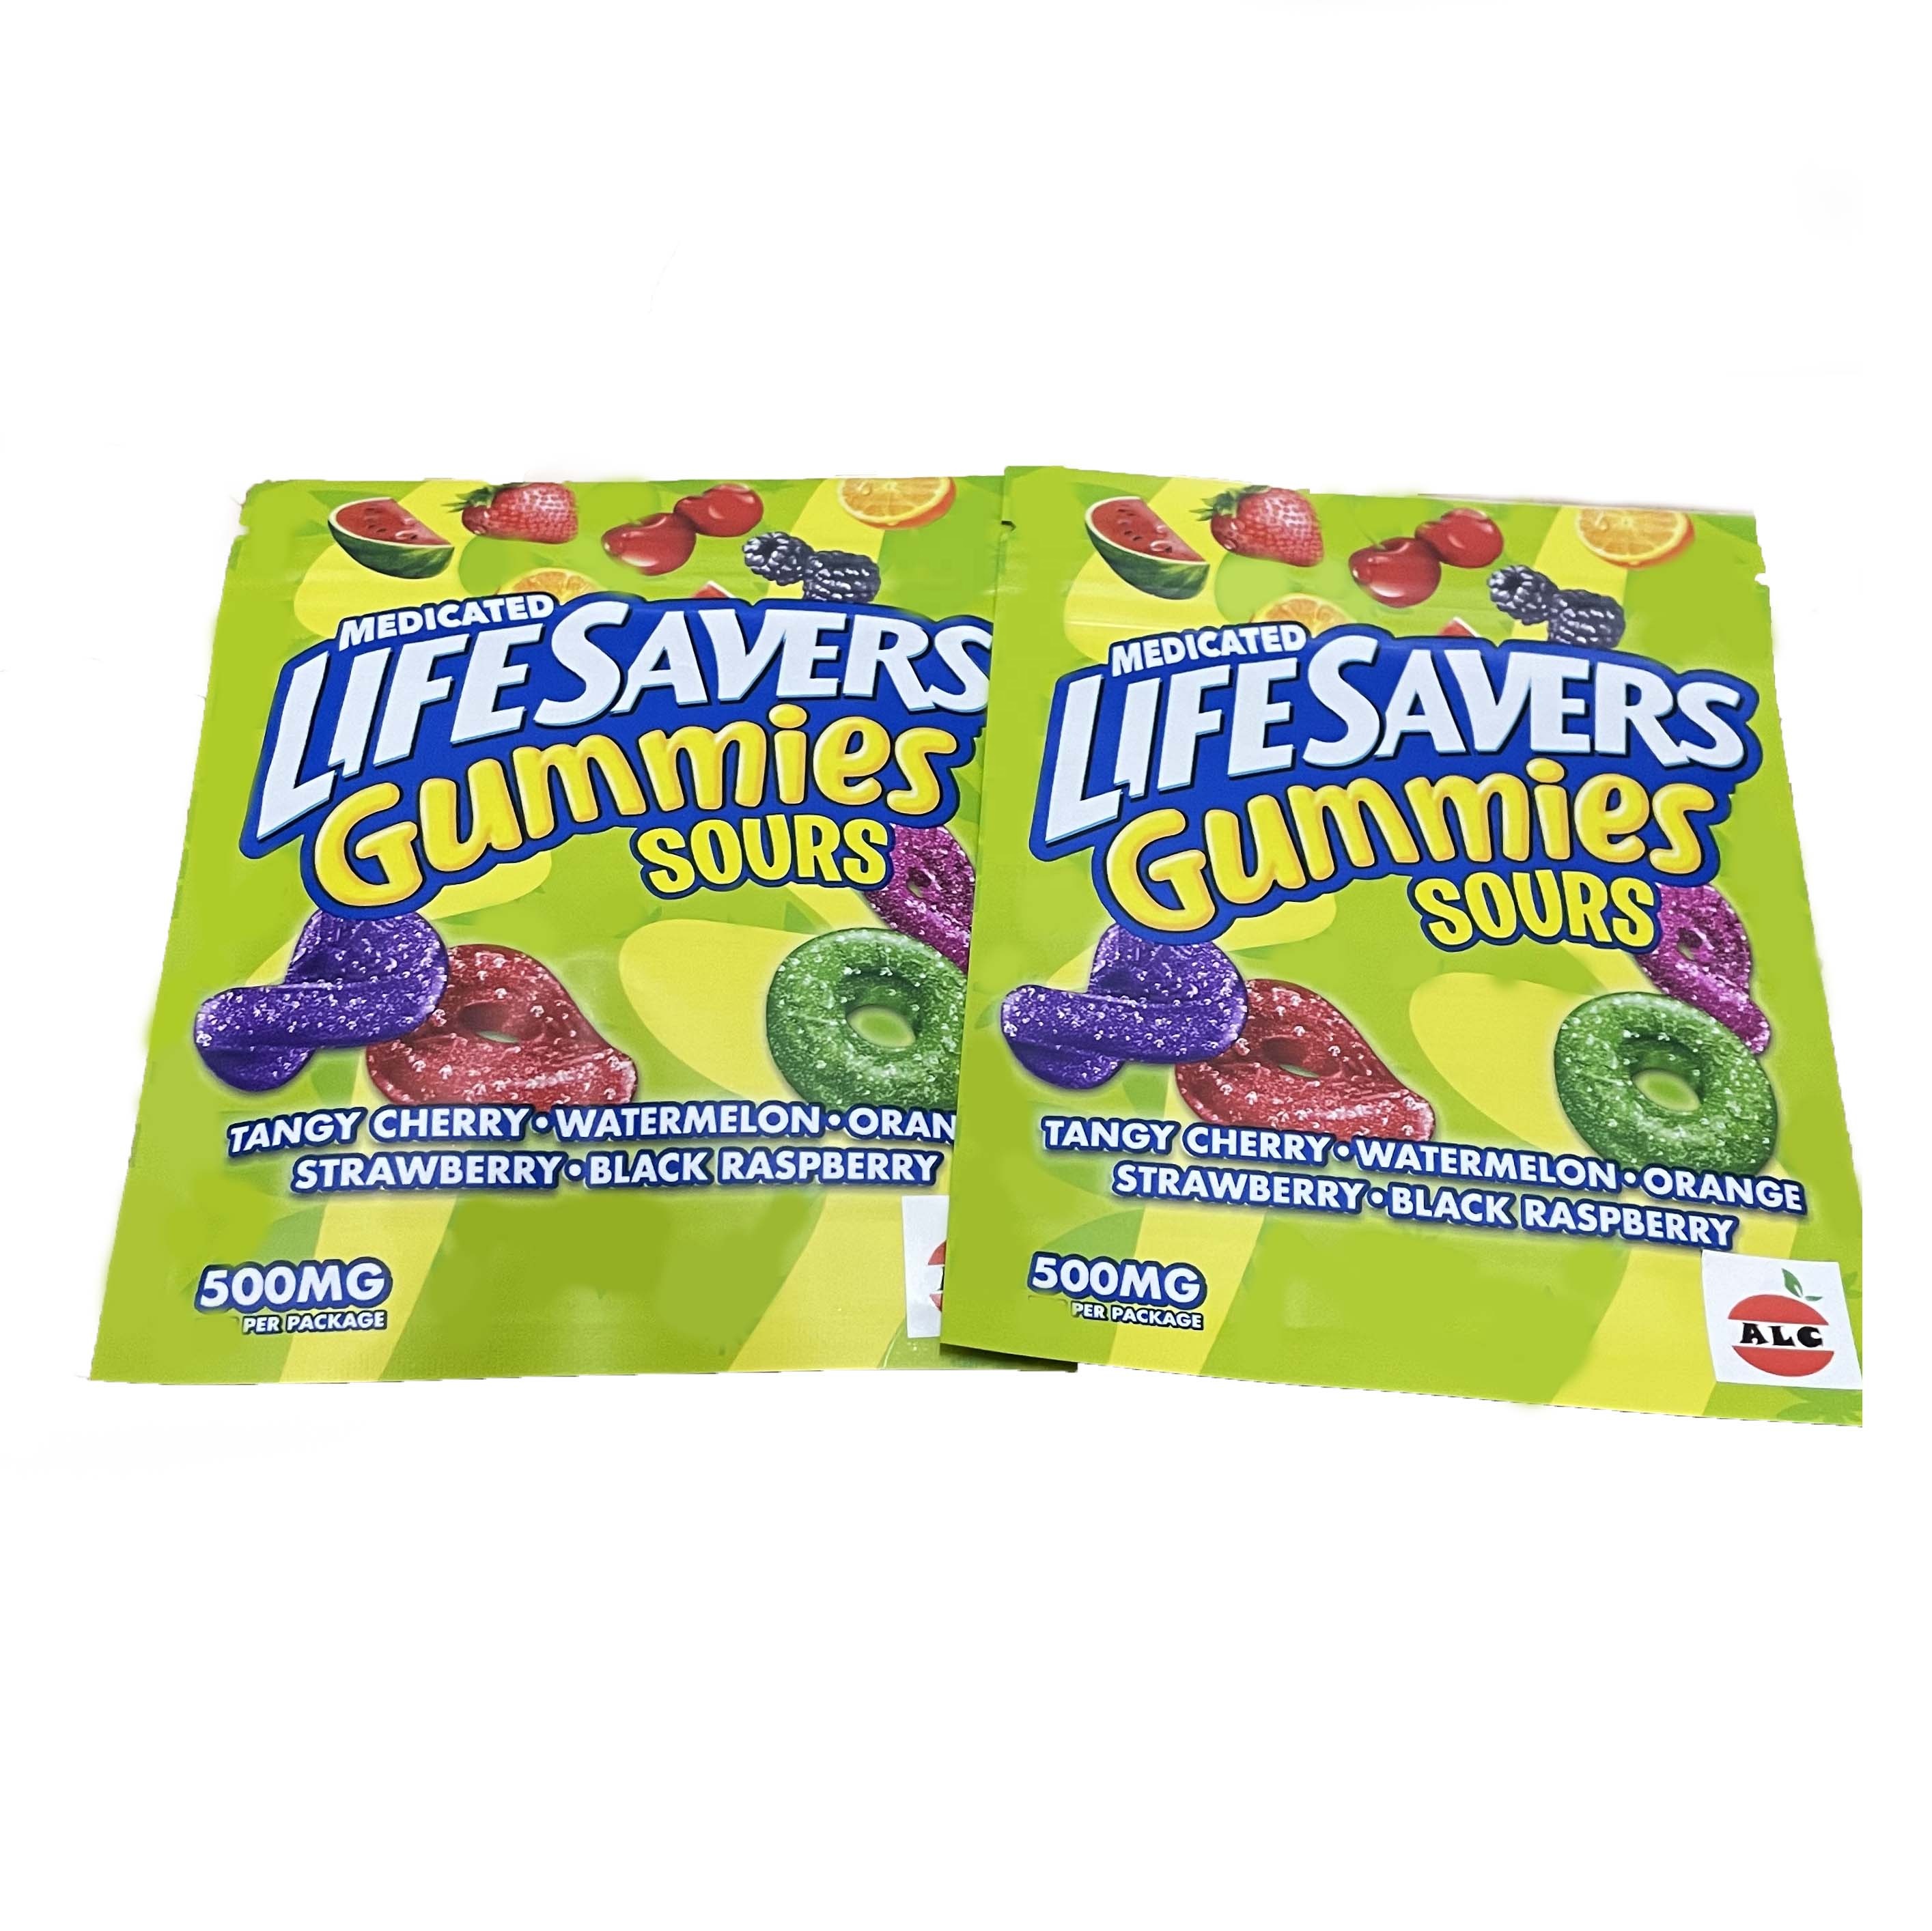 

lifesavers gummies sours Packaging Bags 500MG sour punch bites Zip Lock Edibles Retail Candy Gummy Bag Dry Flower SmellProof Mylar edible